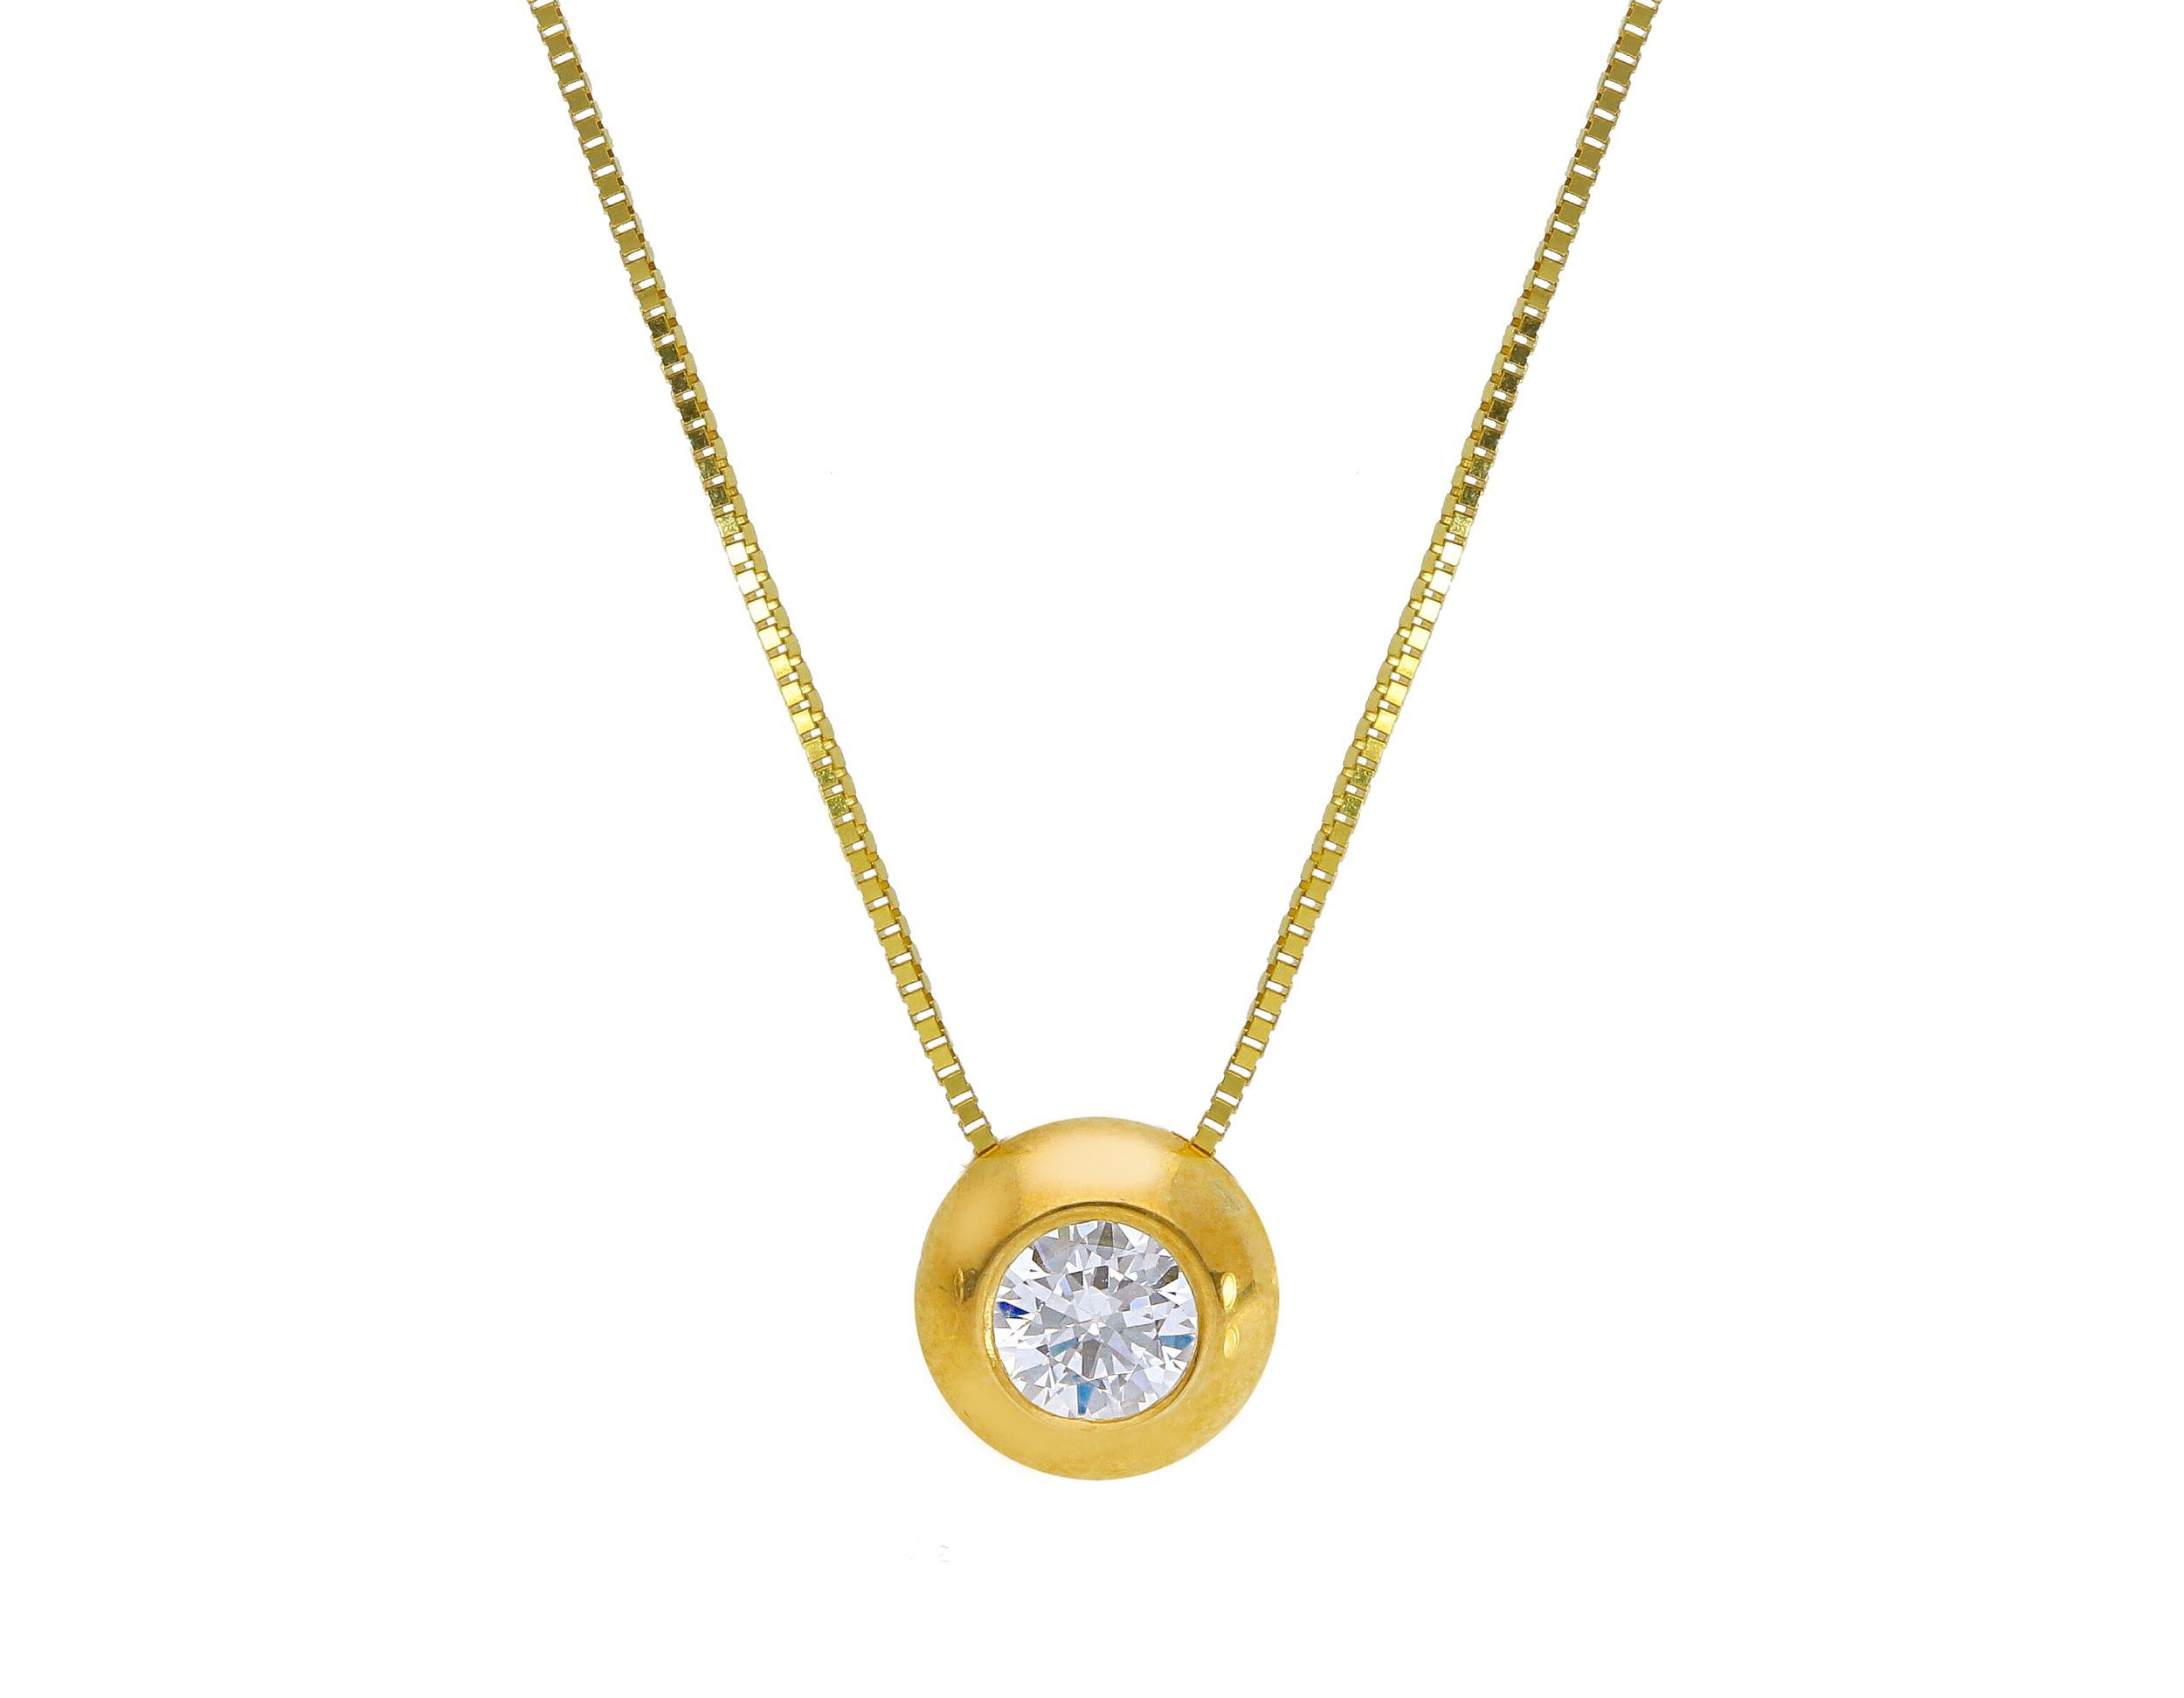 Goden necklace k9 with white zircon (code S168867)